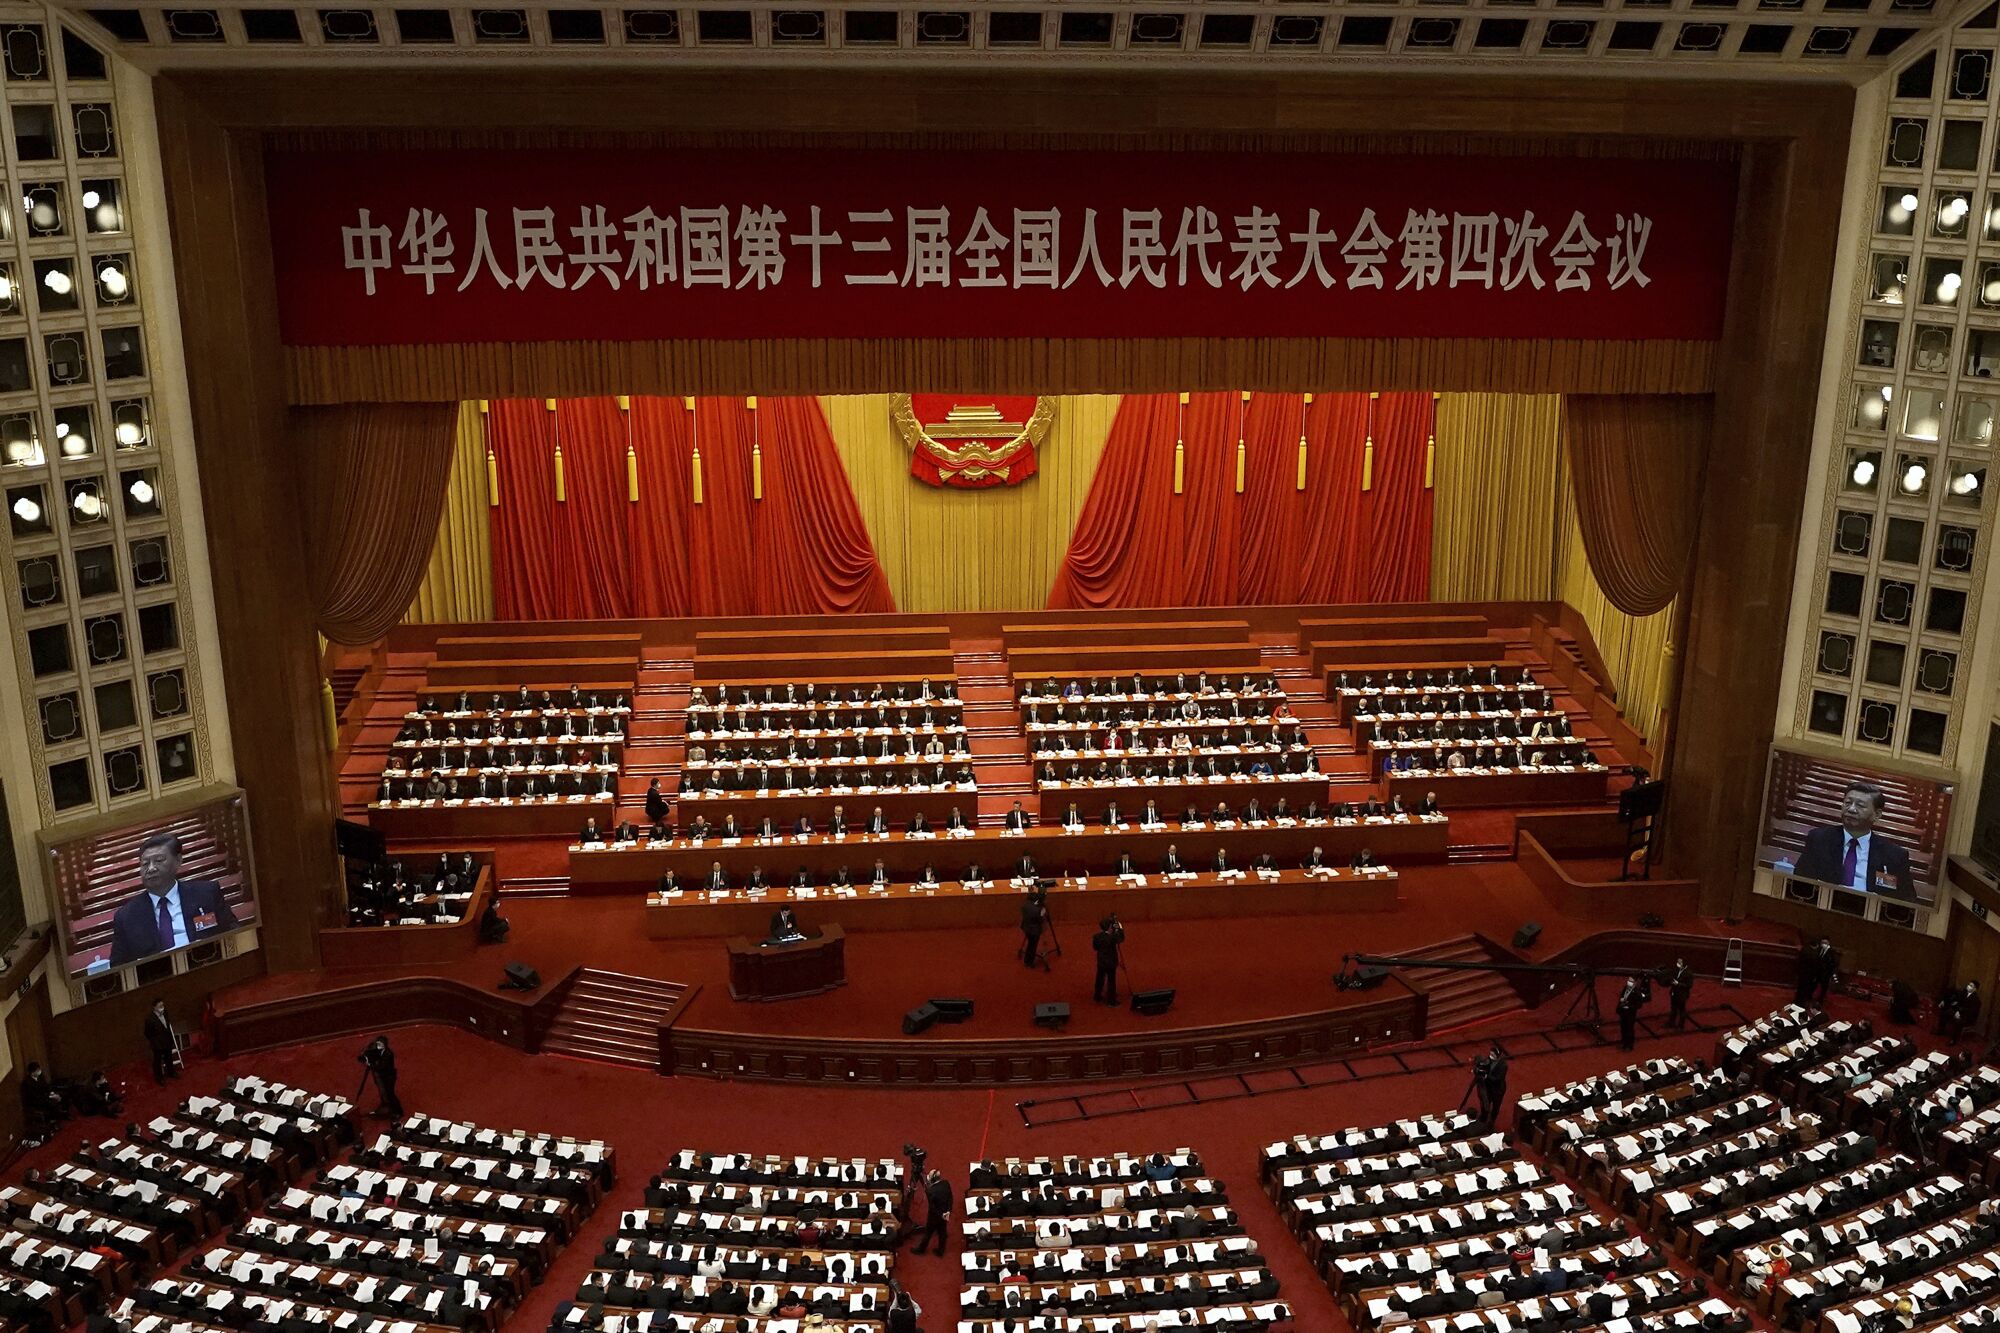 Delegates gather for a session of the Chinese legislature in a red and gold chamber